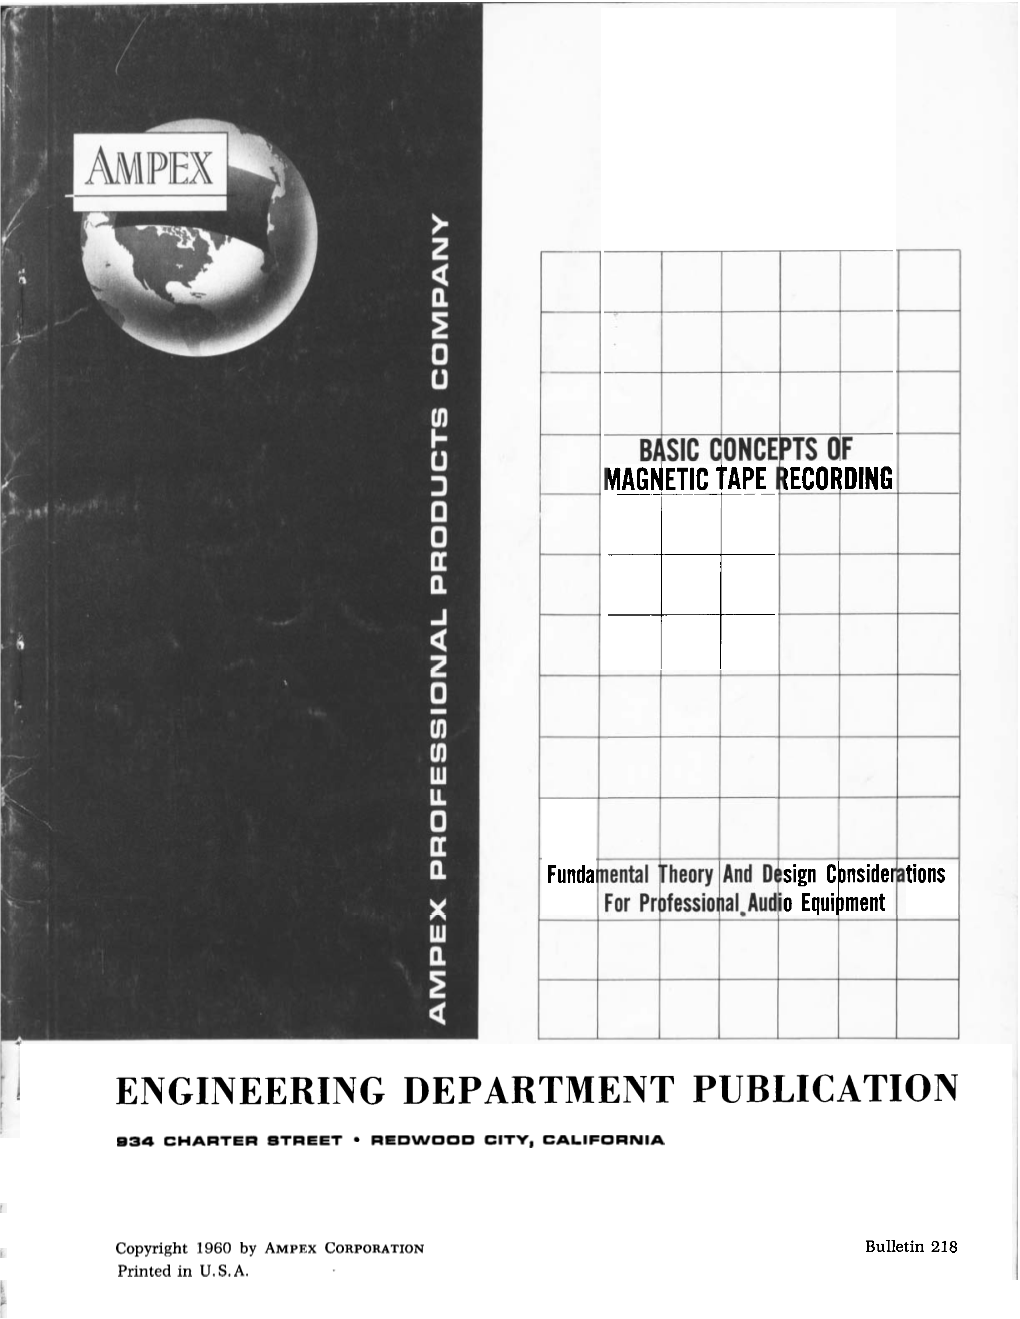 Ampex Basic Concepts of Tape Recording